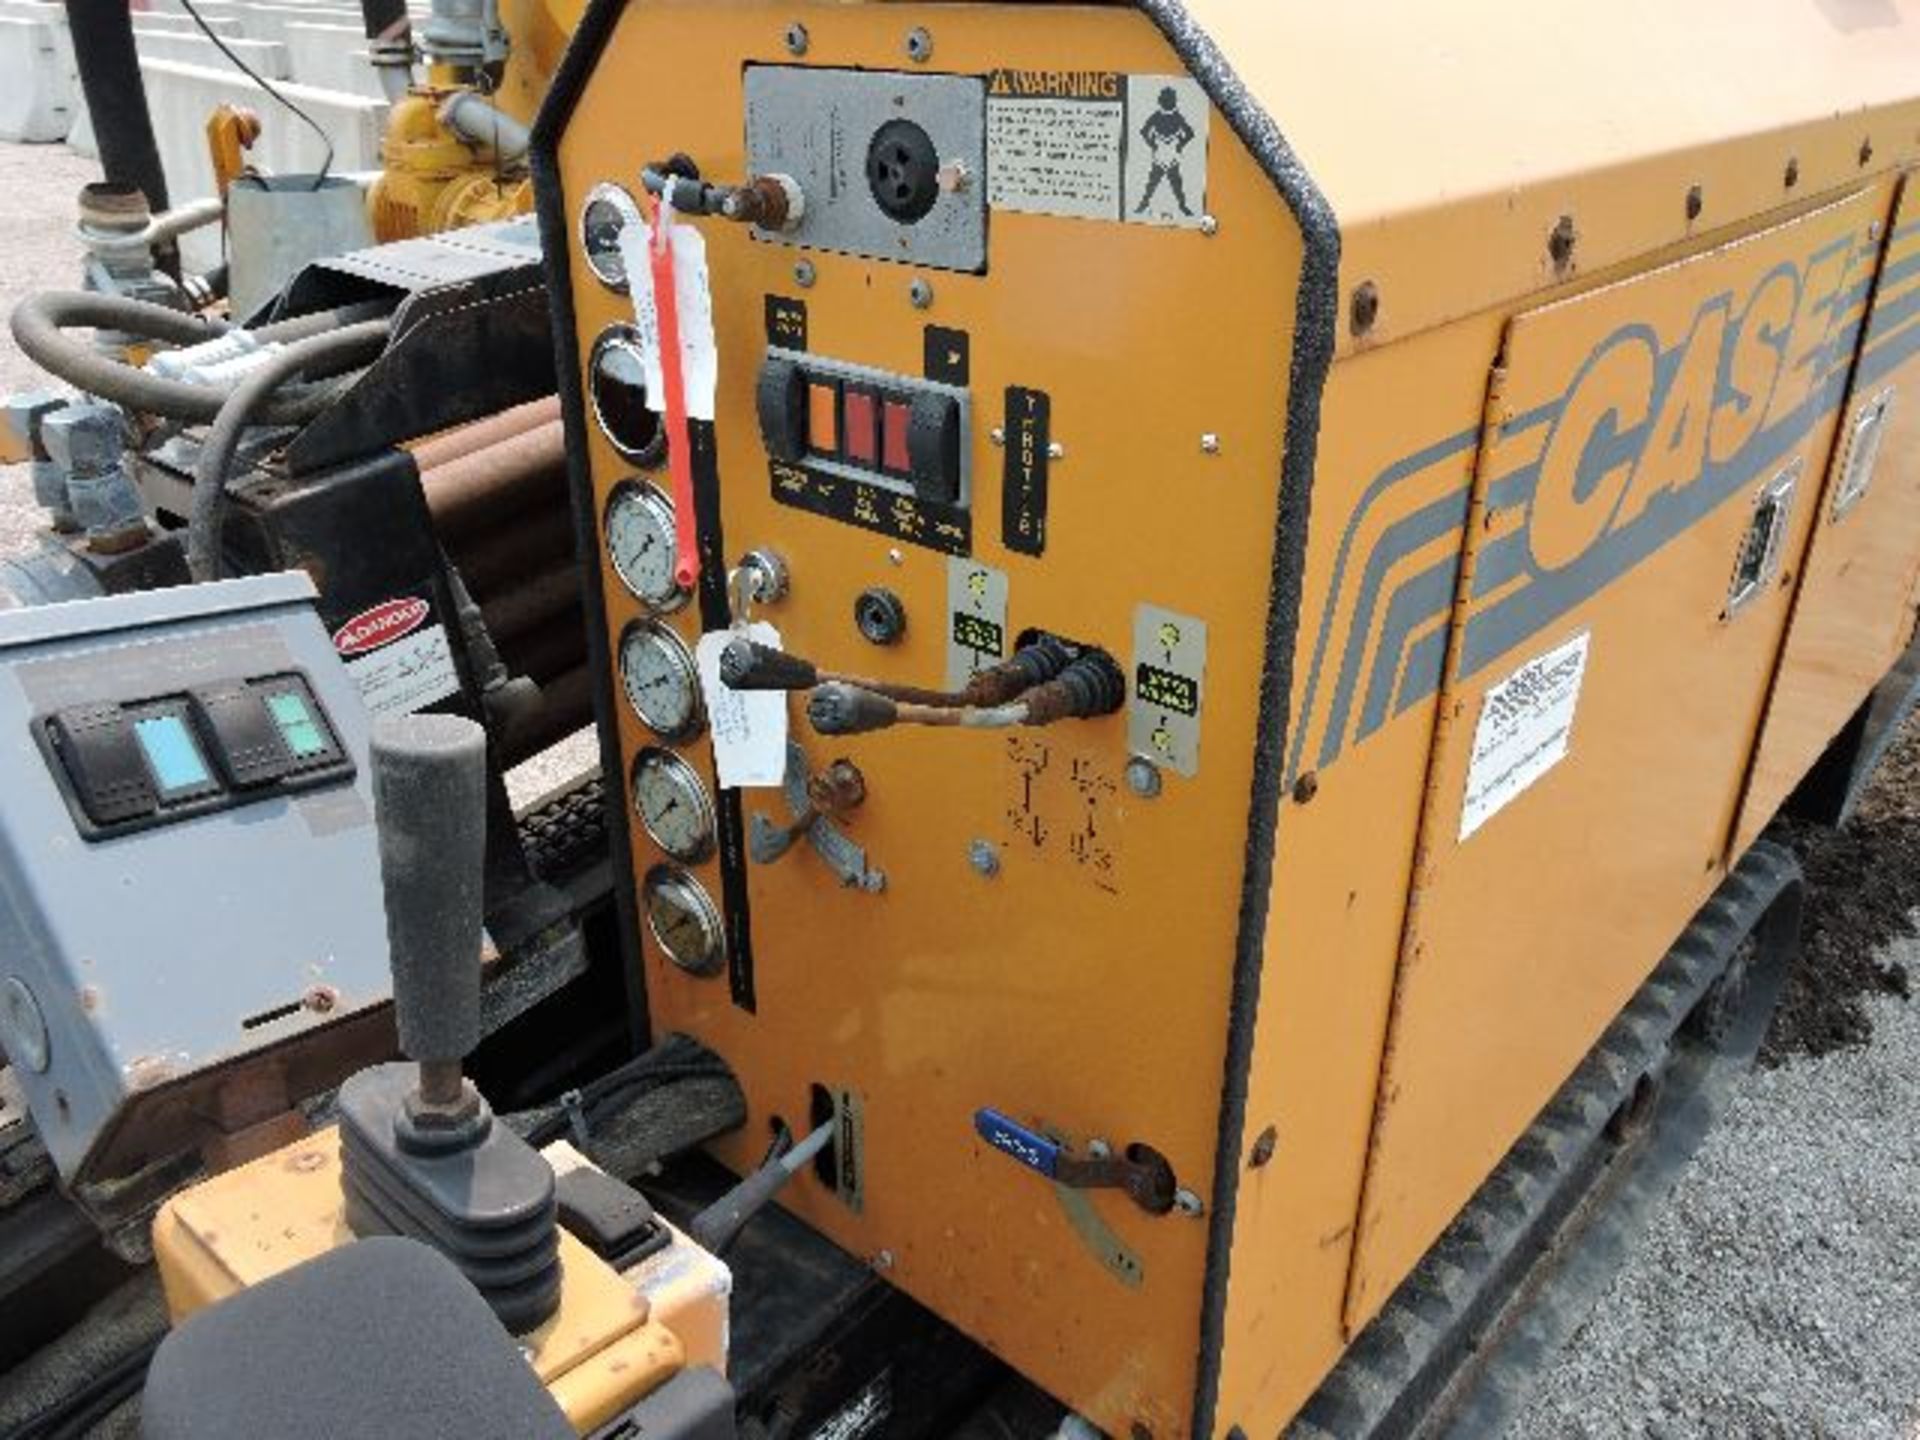 Case Boring Machine, Model 200TX, S/N 200TX-020196, Machine Comes With 15 Pcs. Of Boring Rod. - Image 4 of 11